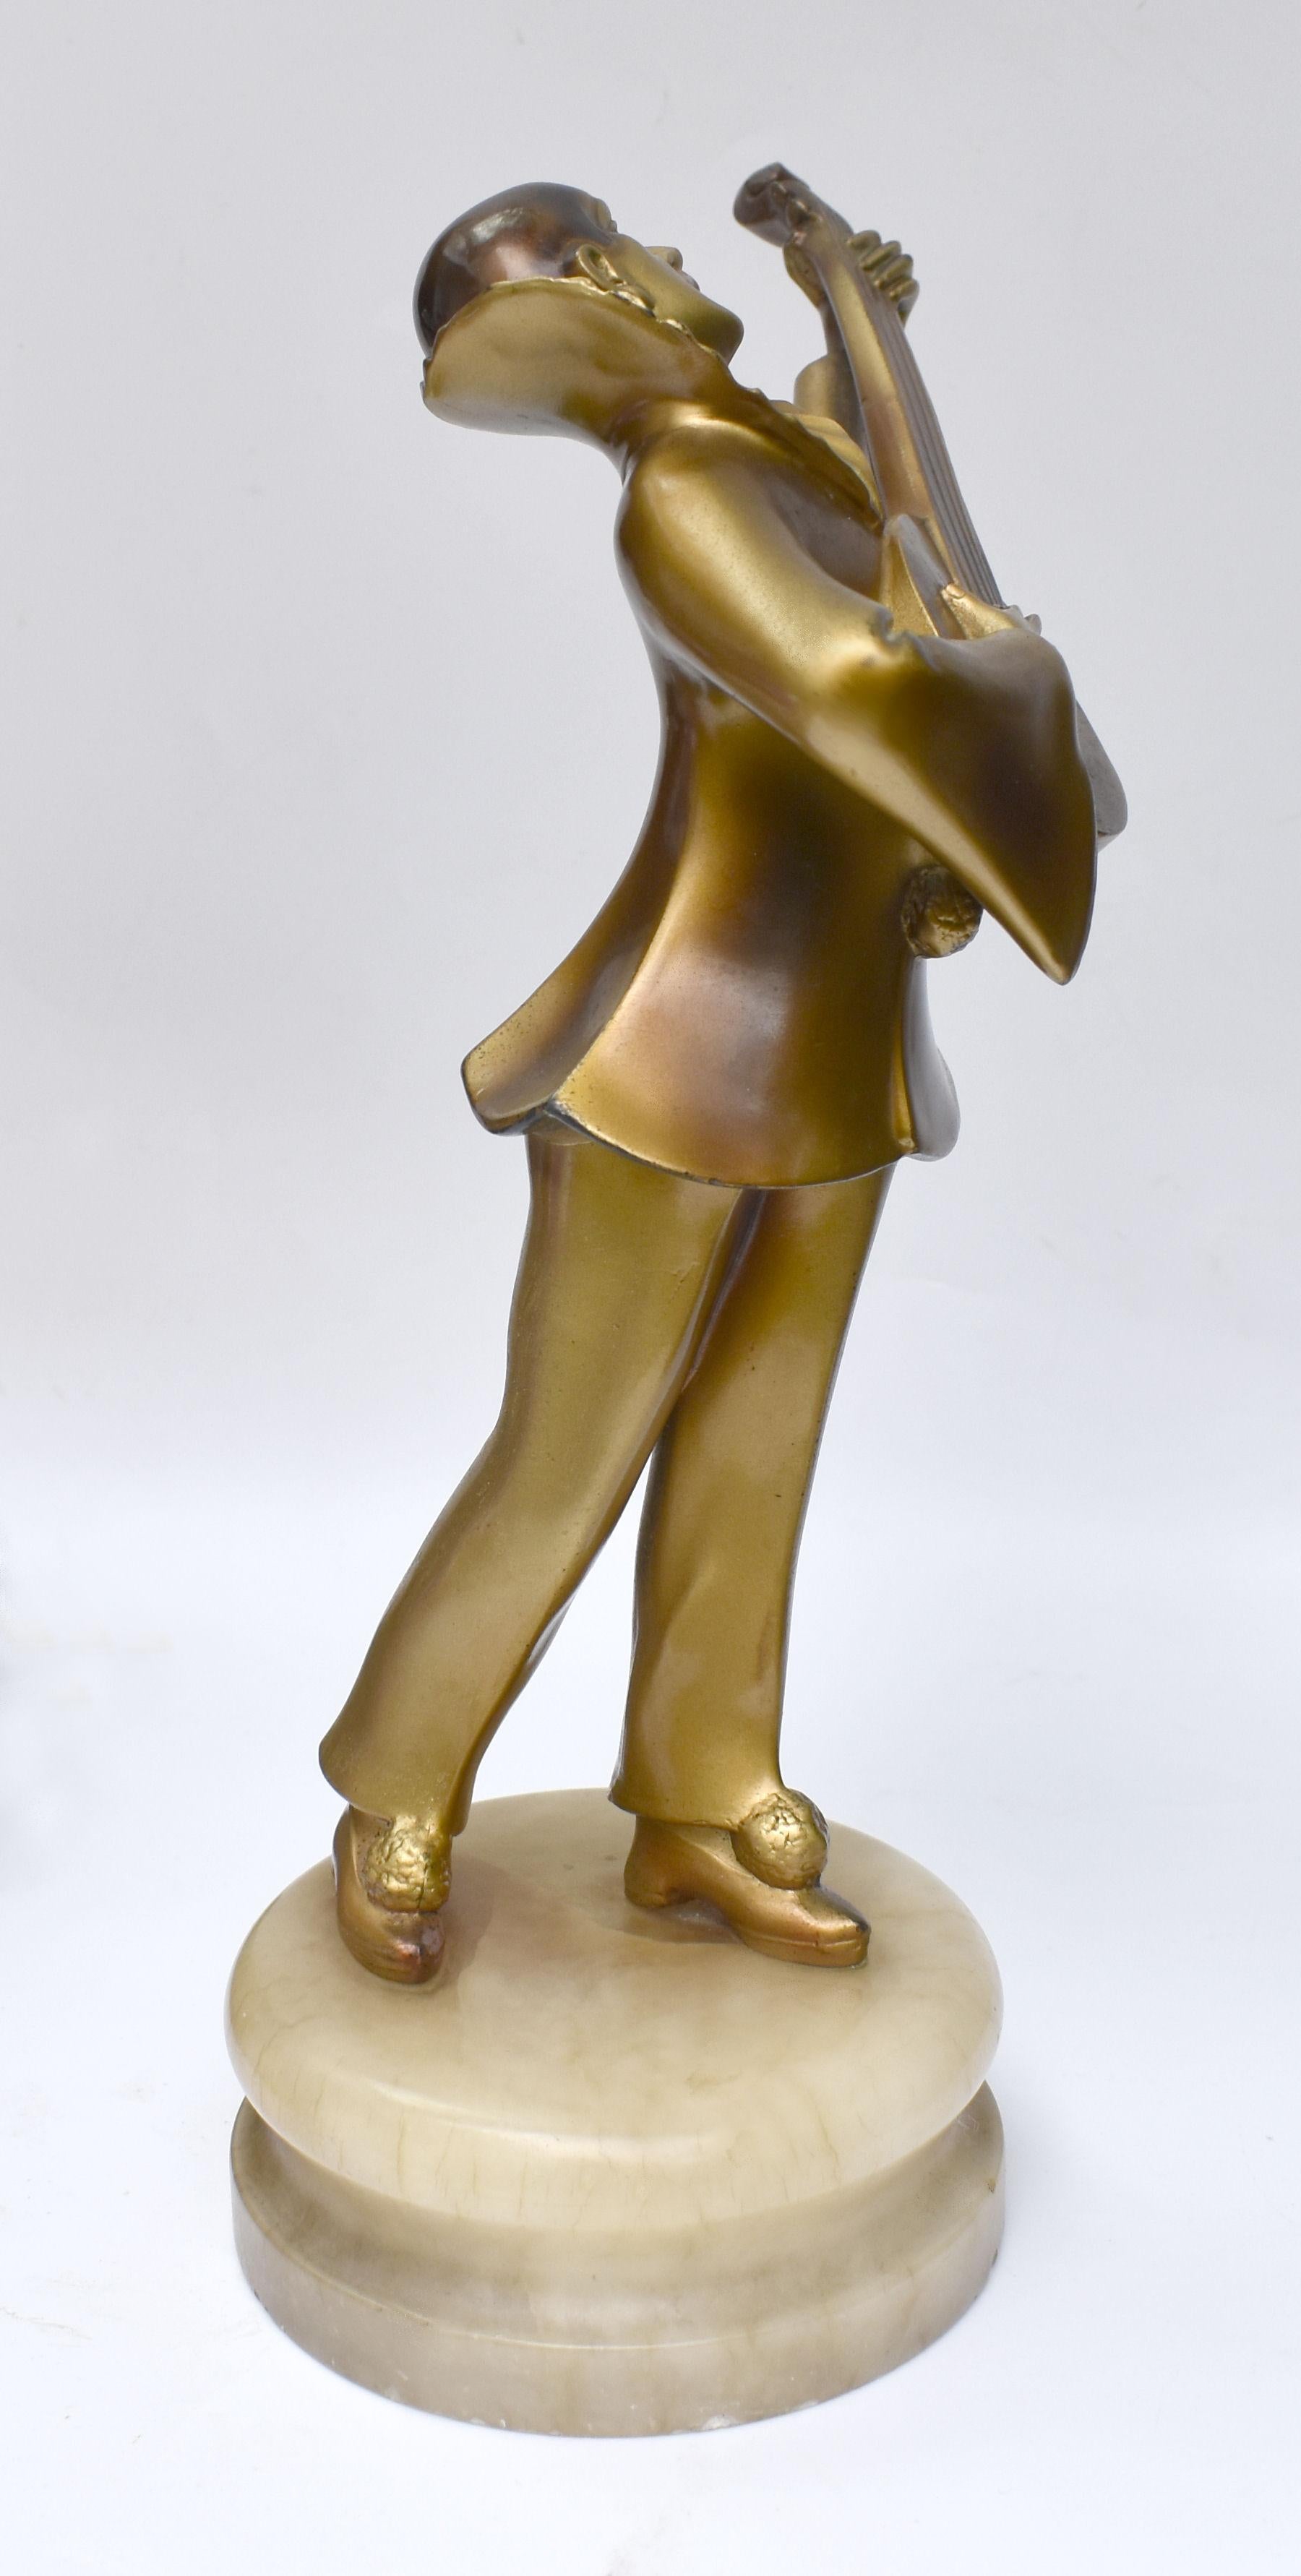 For your consideration is this unsigned Lorenzl cold painted spelter figure, dating to the 1930's depicting a Mandolin player mounted on a alabaster base. Condition is very good, no damage or restoration, lovely item and perfect to add to